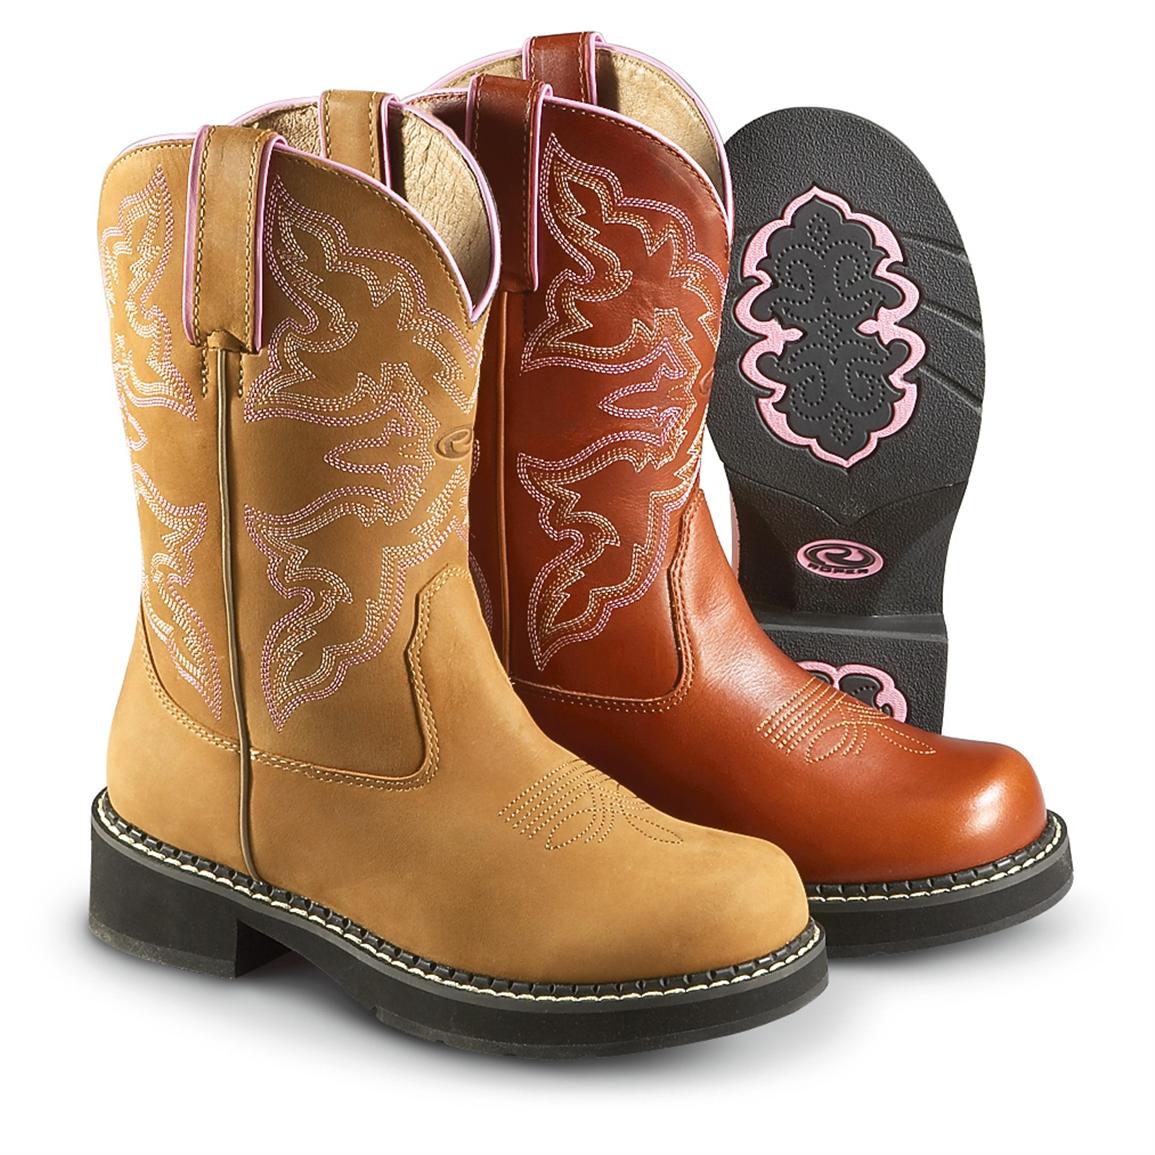 Women's Roper® Riders 158080, Western & Cowboy Boots at